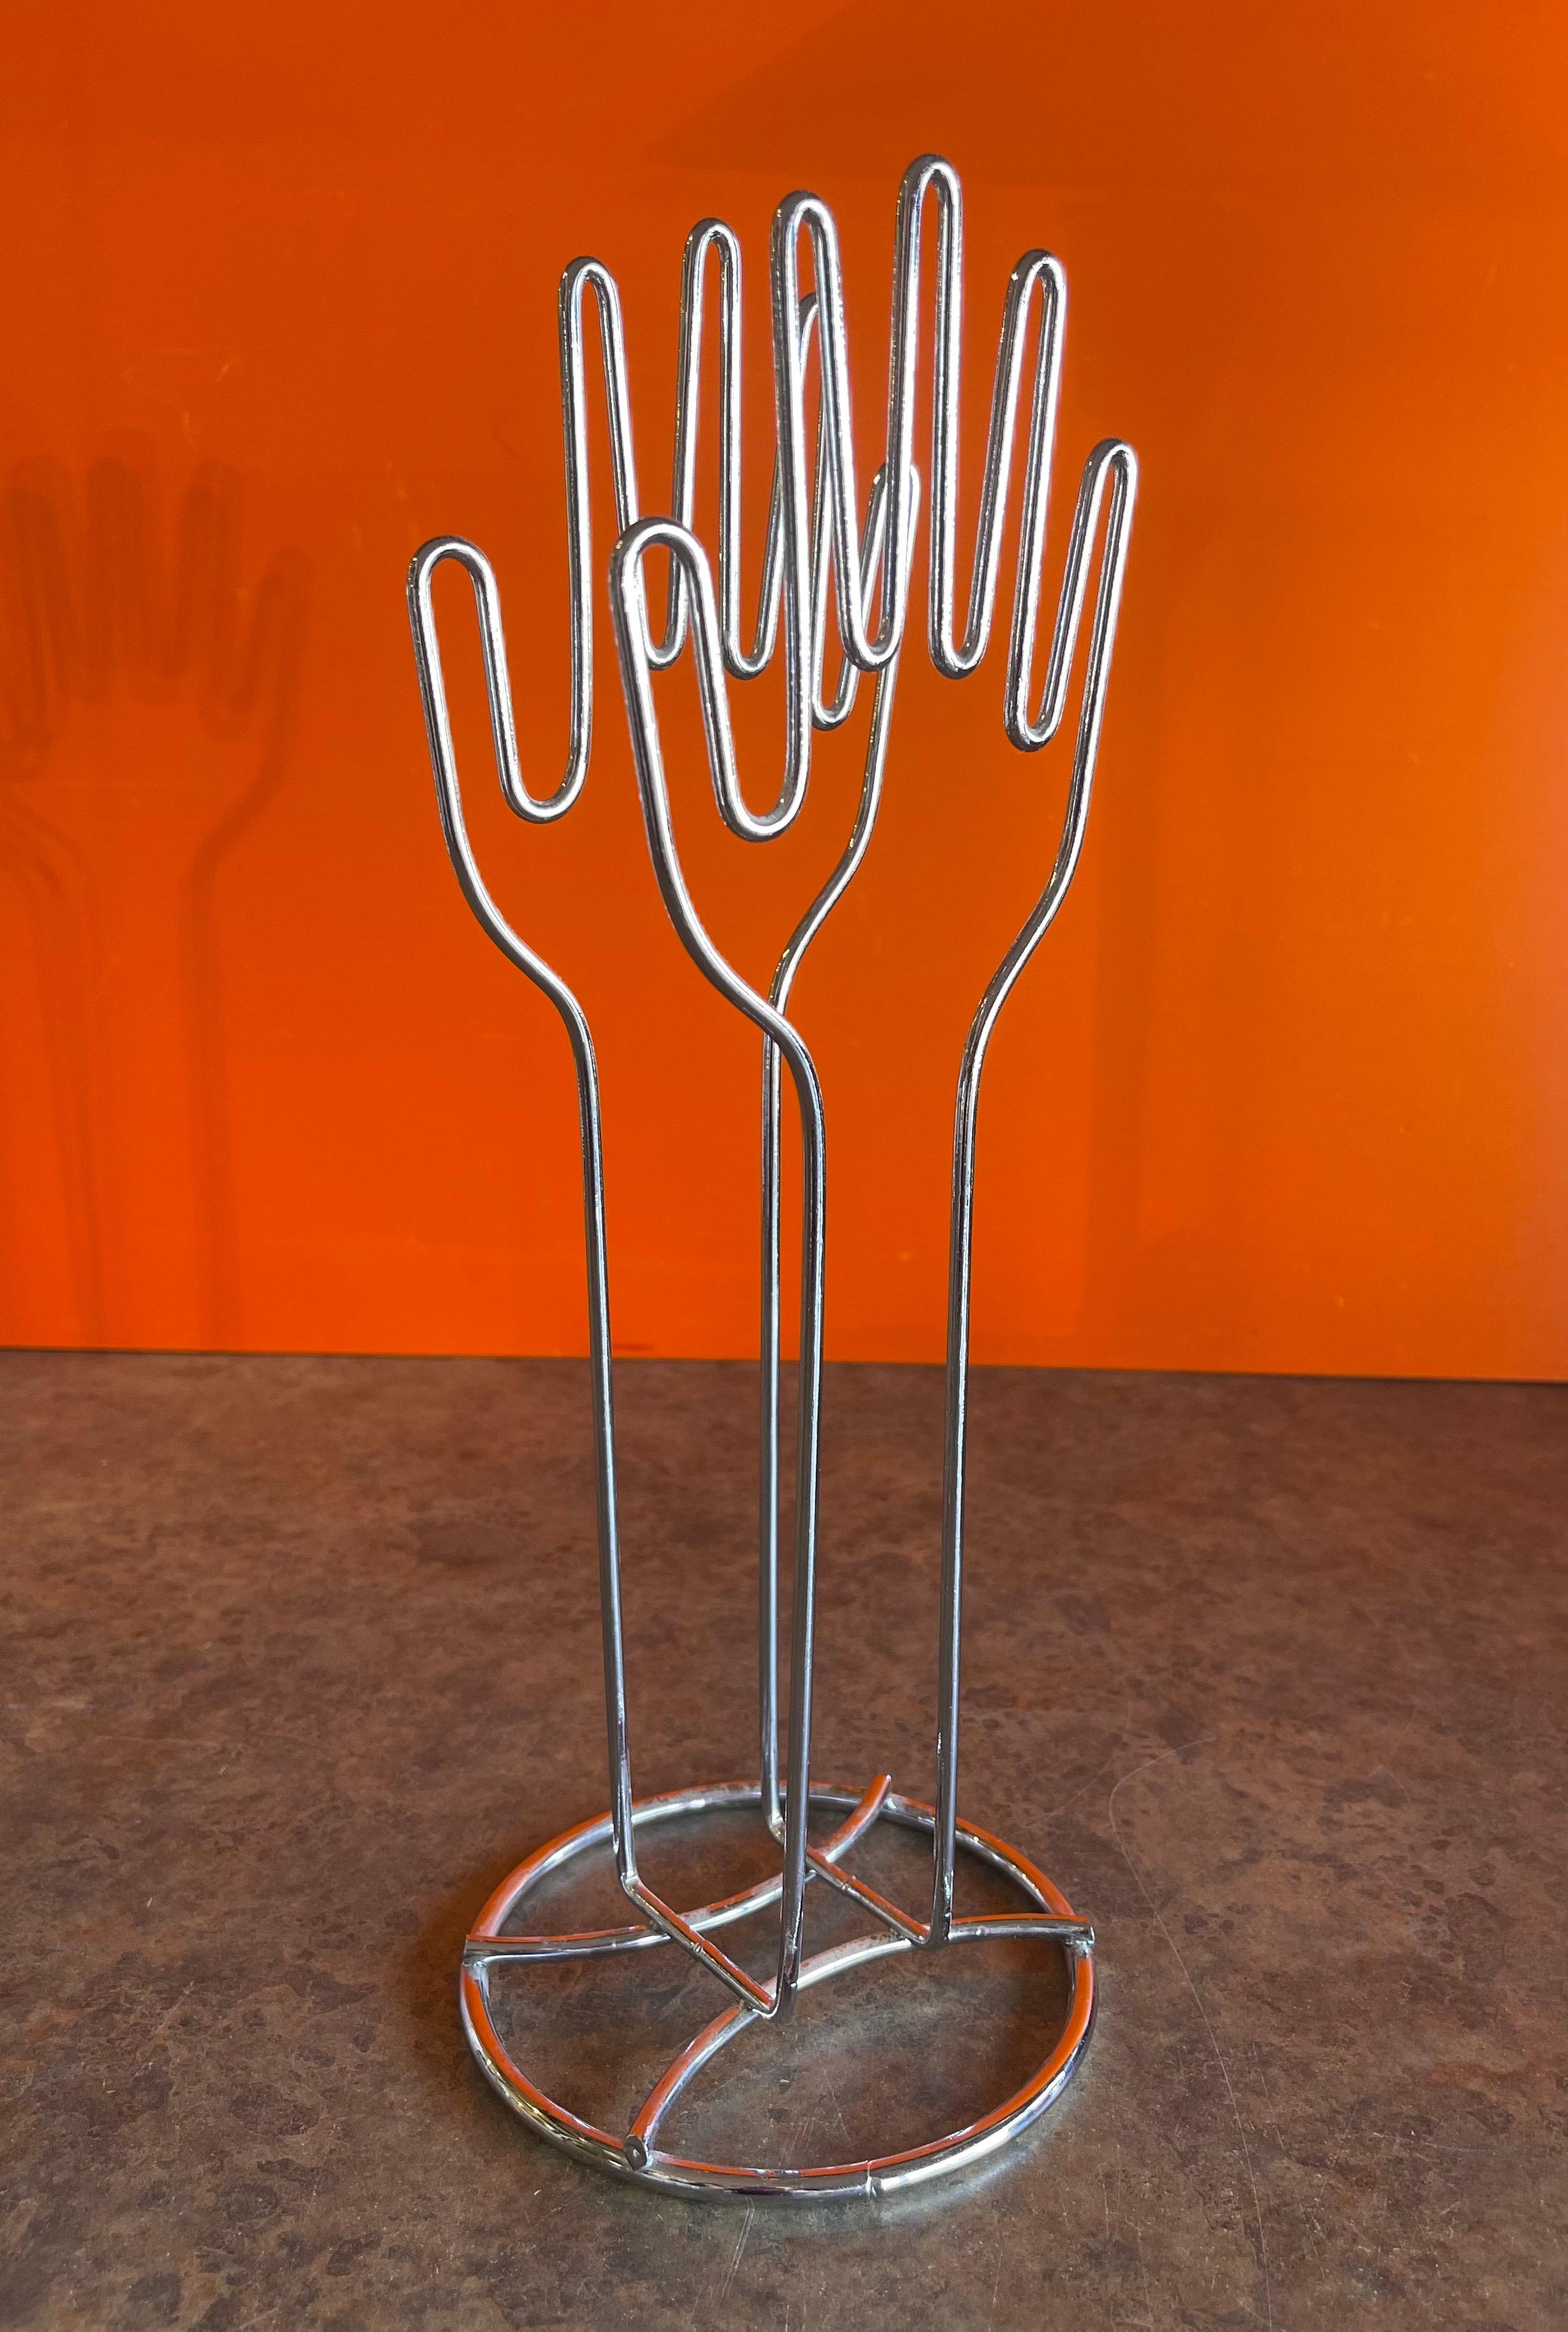 Nice clapping hands wire sculpture model in chrome that can double as a paper / folder holder, circa 1980s. The piece is 13.5